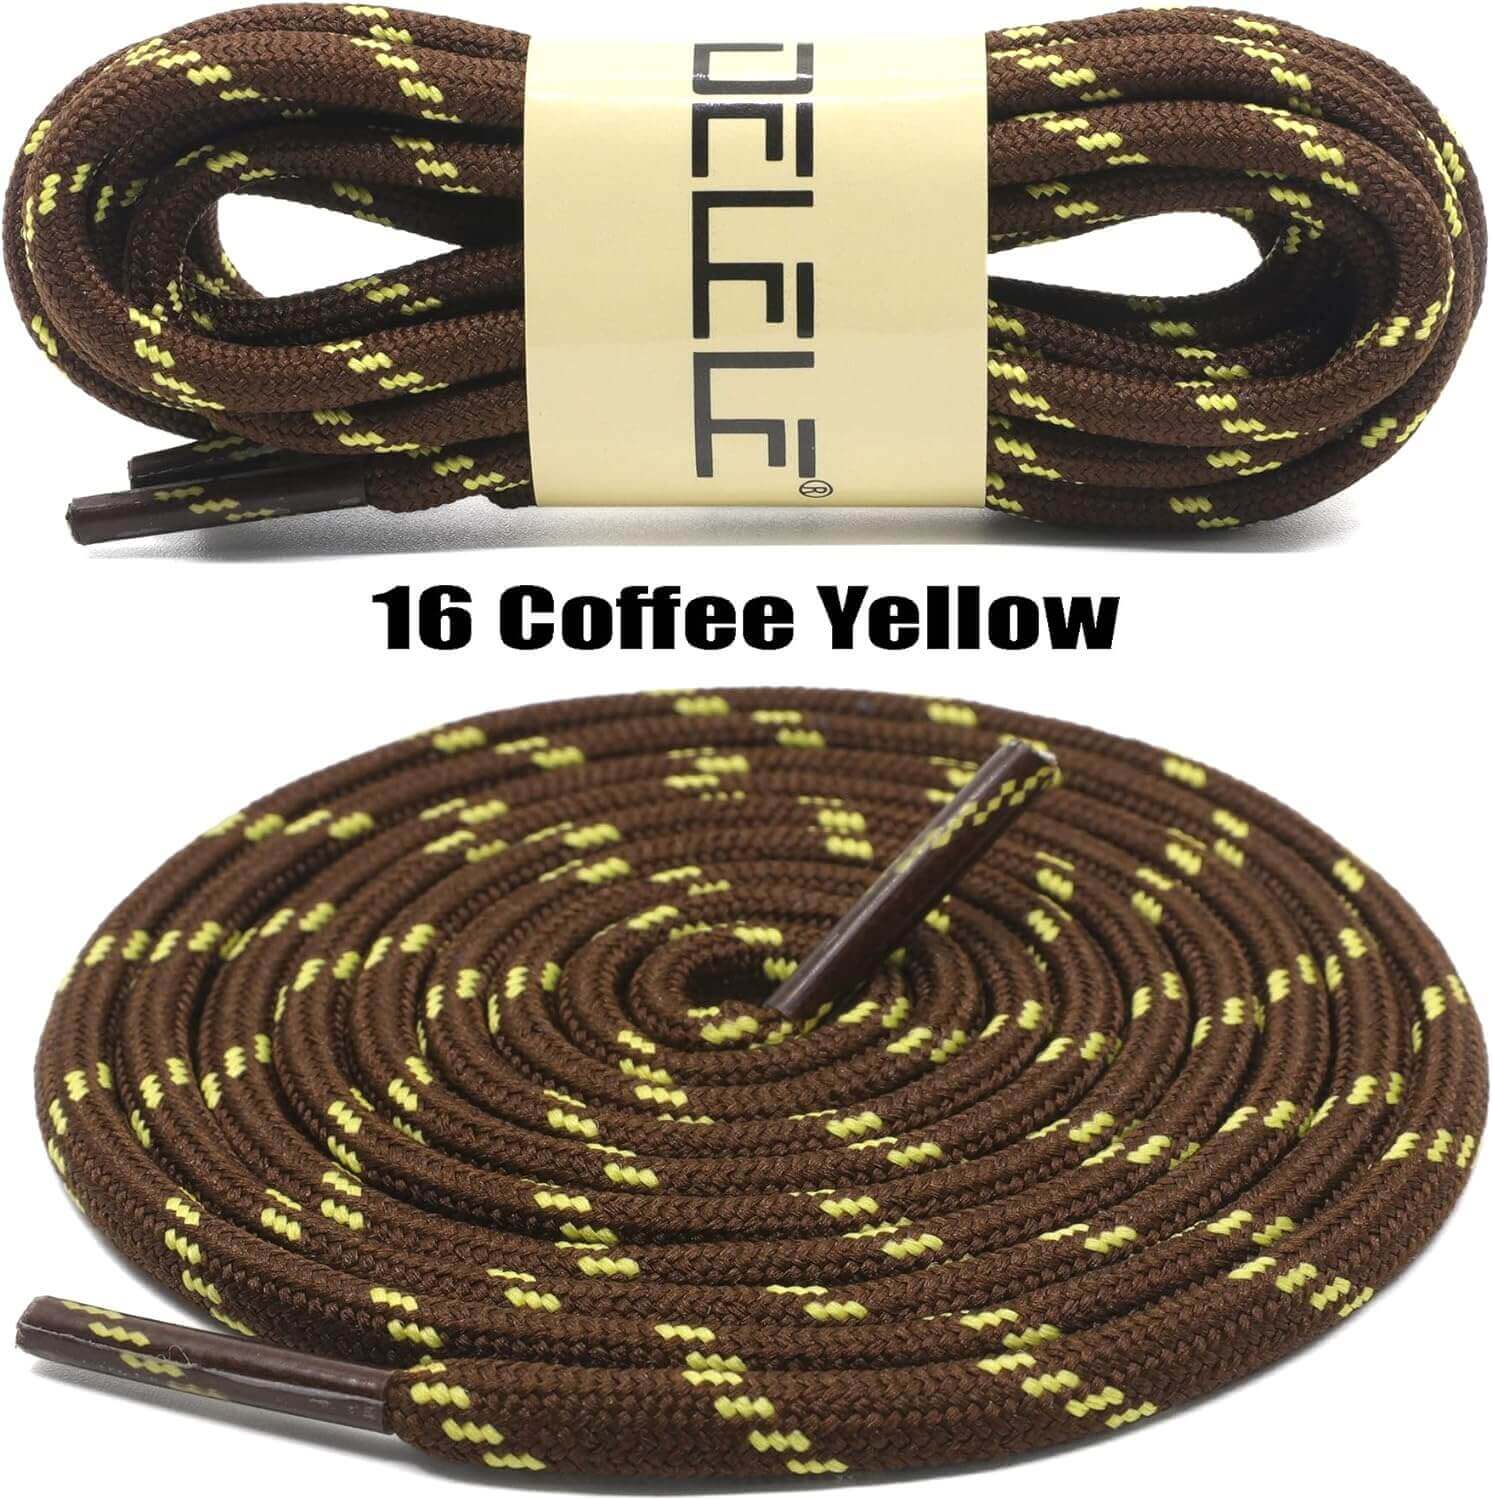 Shop The Latest >2 Pair Work Boot Laces - Hiking, Walking, Shoelaces > *Only $12.95*> From The Top Brand > *DELELEl* > Shop Now and Get Free Shipping On Orders Over $45.00 >*Shop Earth Foot*